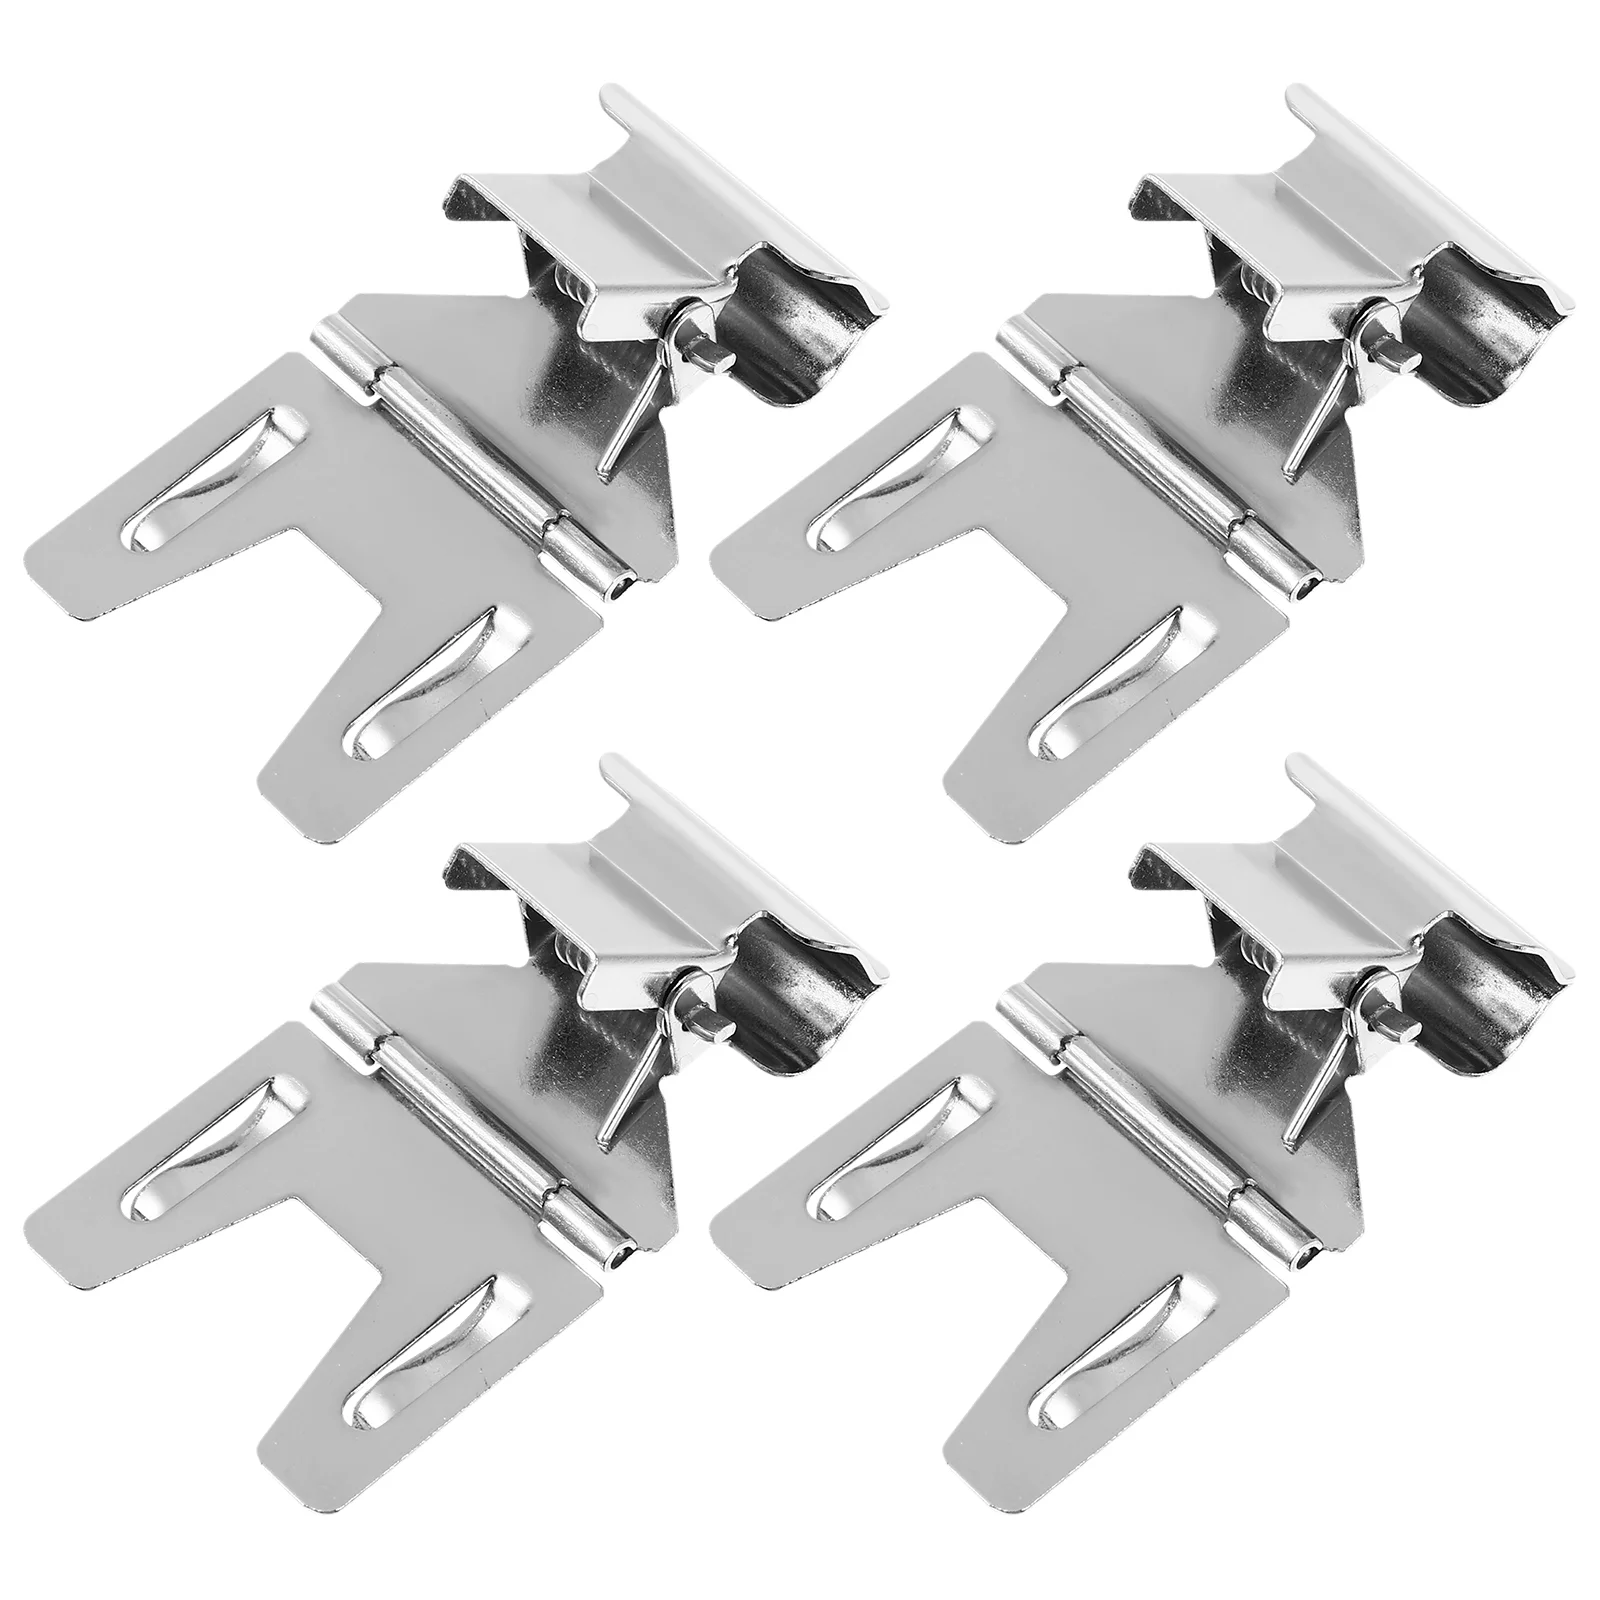 

4 Pcs Price Tag Clip Label Clamps Signs Clips Supermarket Rack Supermarkets Display Metal Promotional